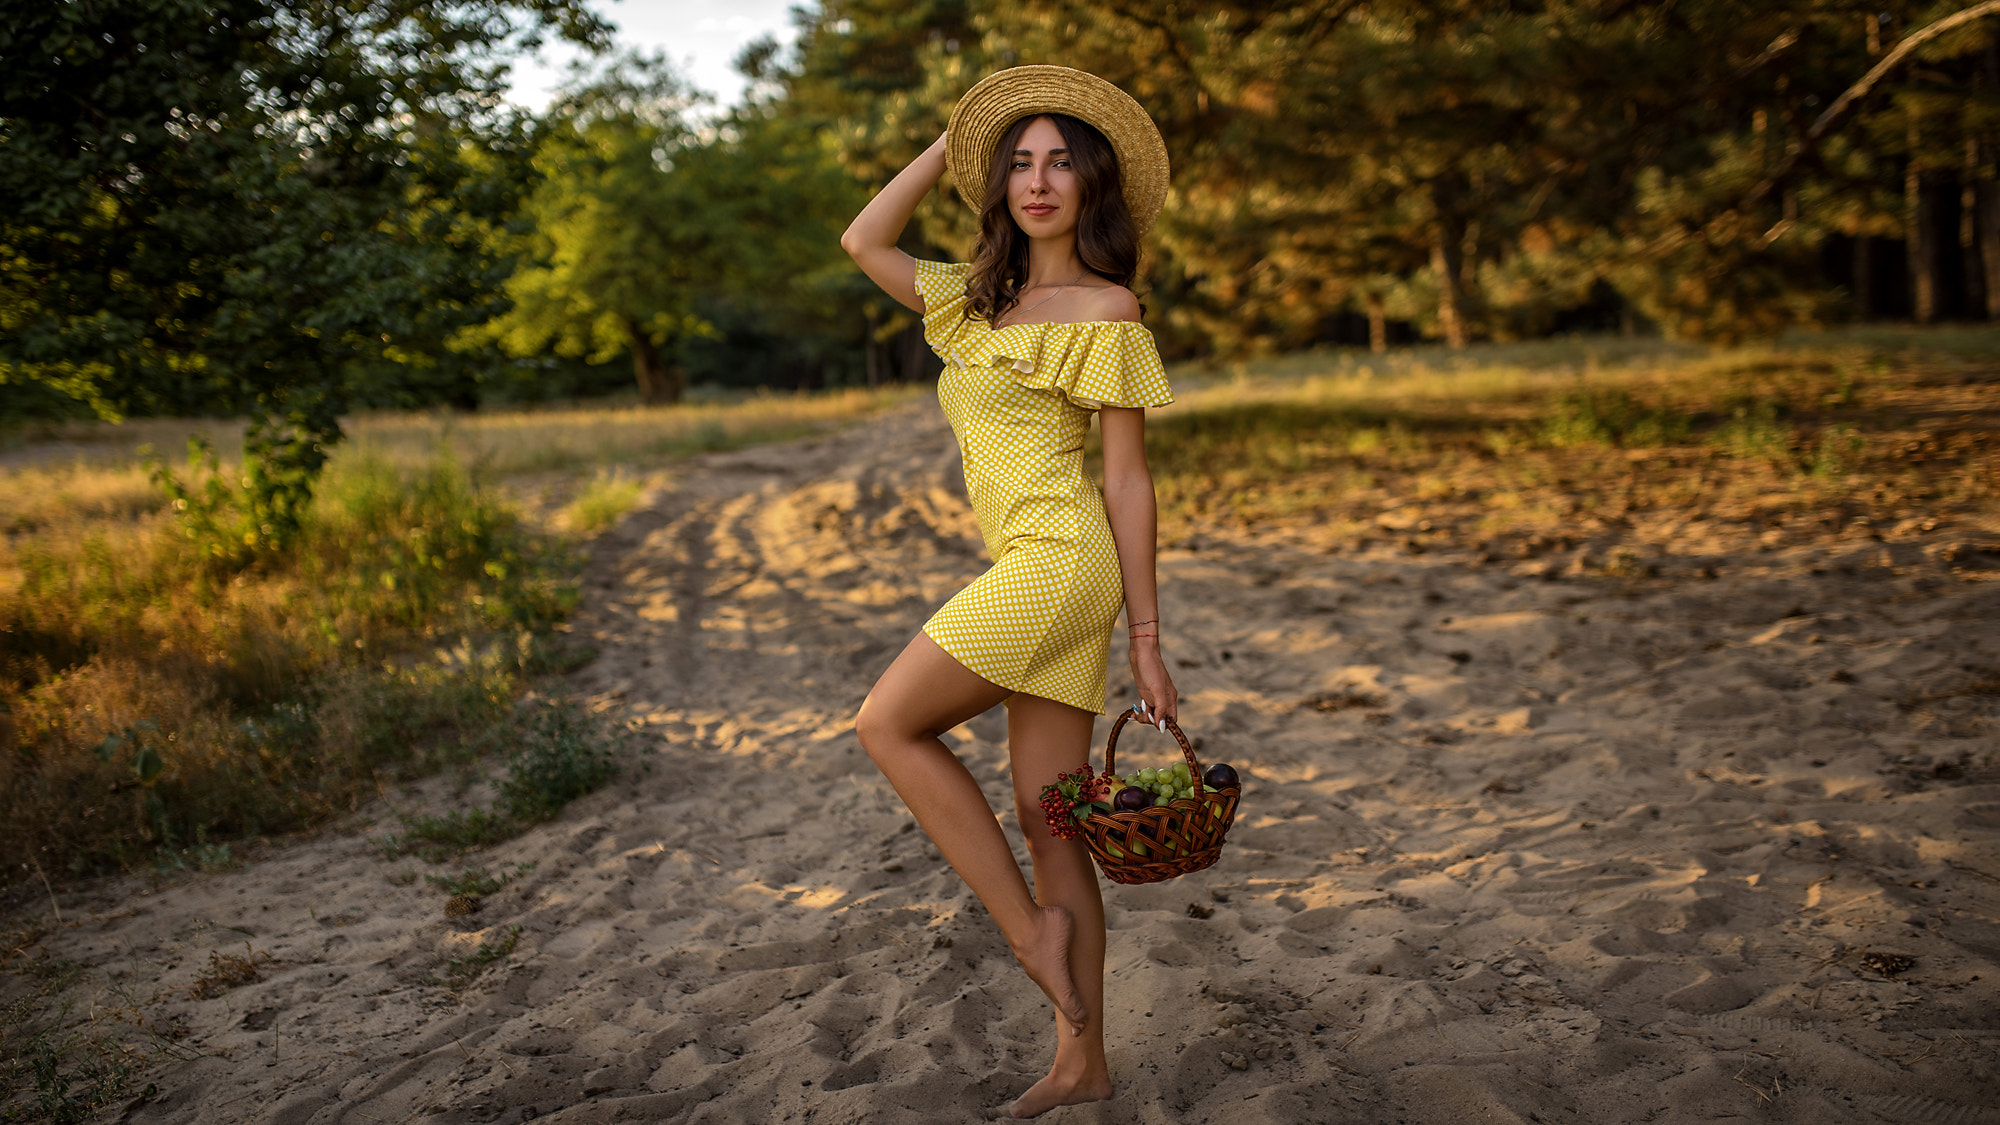 People 2000x1125 women skinny yellow dress women outdoors brunette hat smiling fruit polka dots necklace trees pointed toes